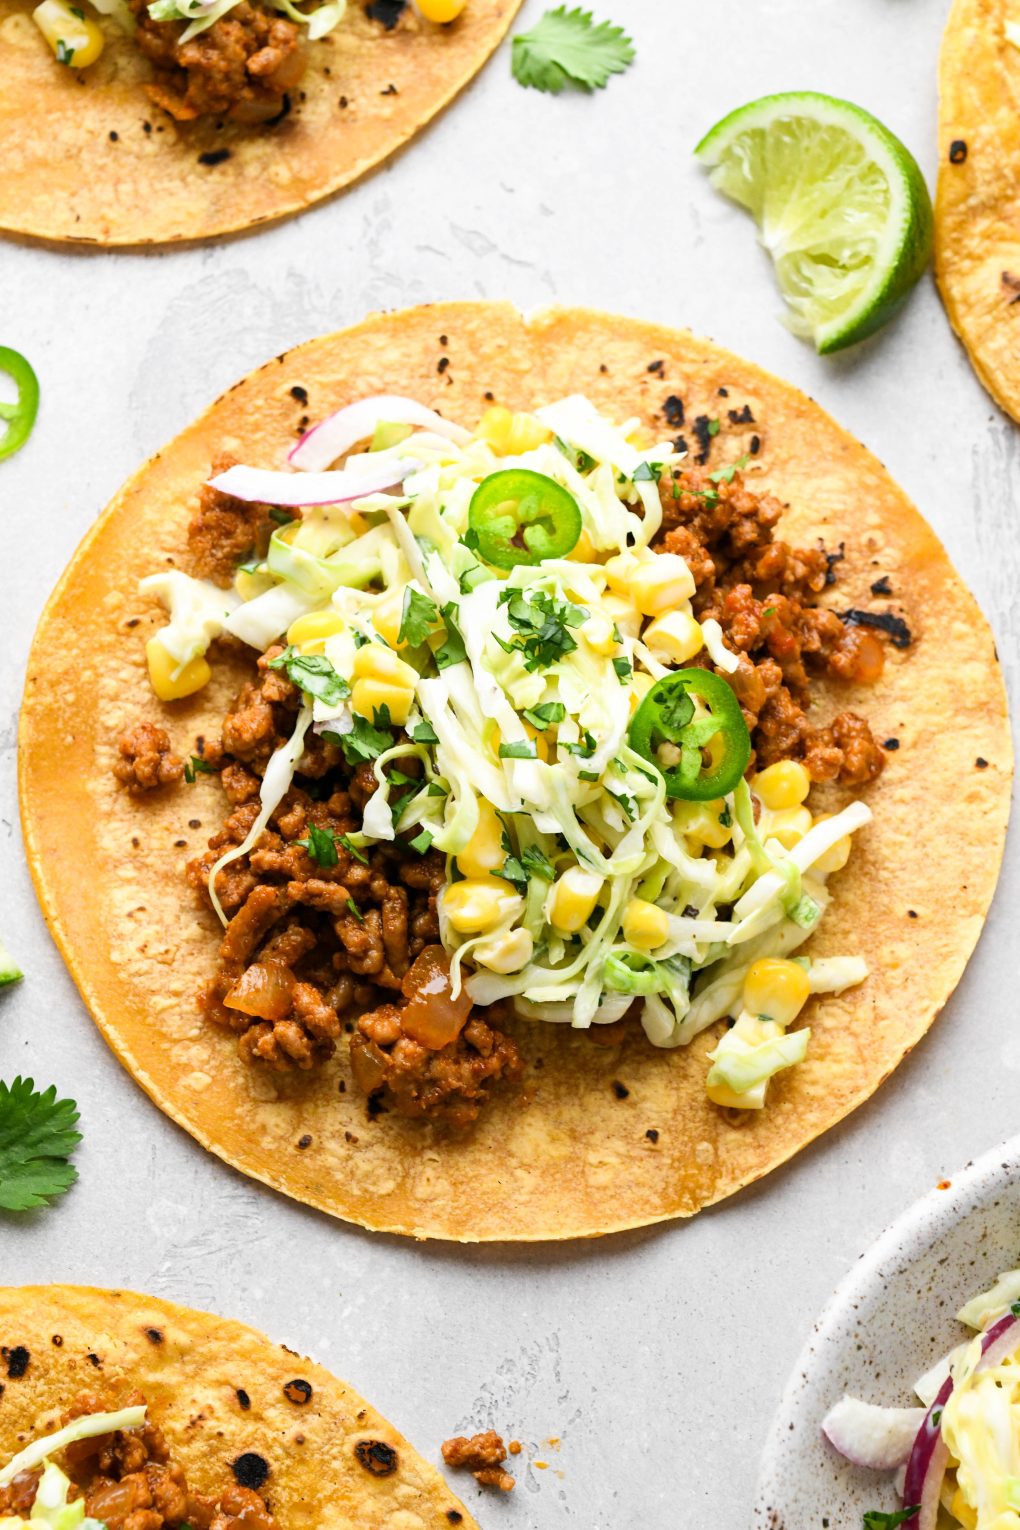 A single ground pork taco laid out on a concrete surface, topped with a creamy cabbage and corn slaw, with jalapeño, cilantro, and lime wedges.